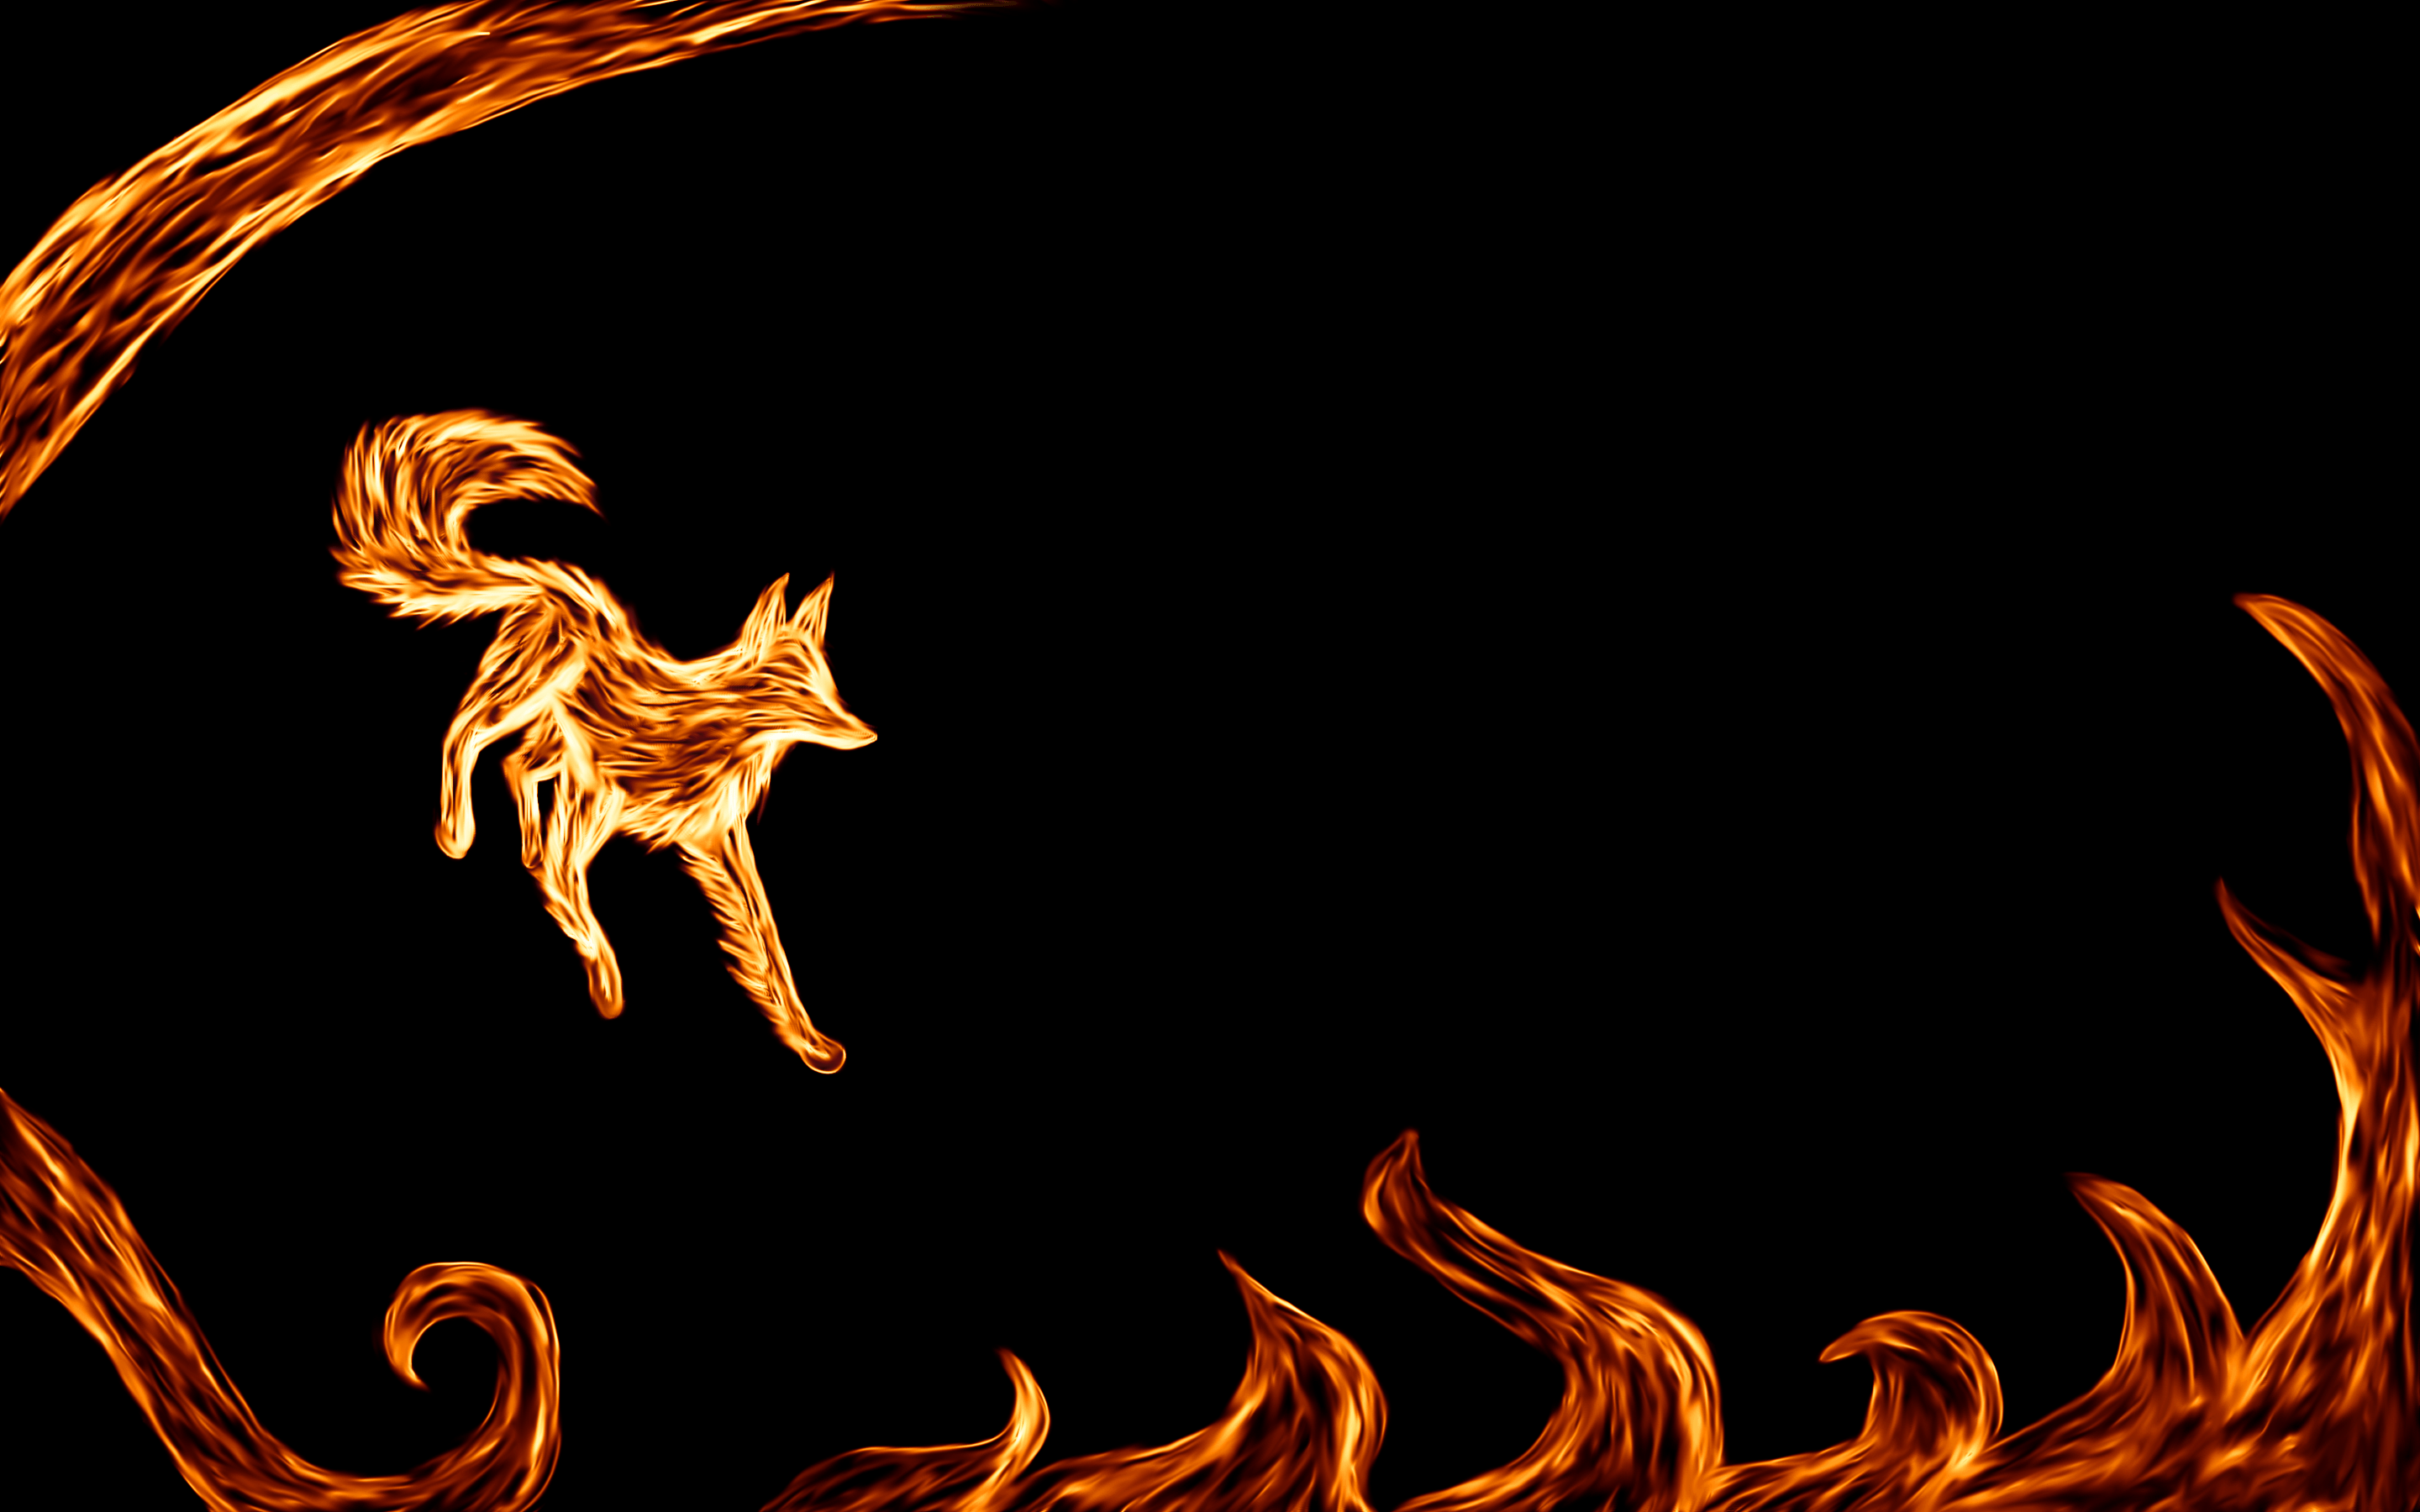 V.44: Wolves And Foxes Wallpapers, HD Image of Wolves And Foxes.